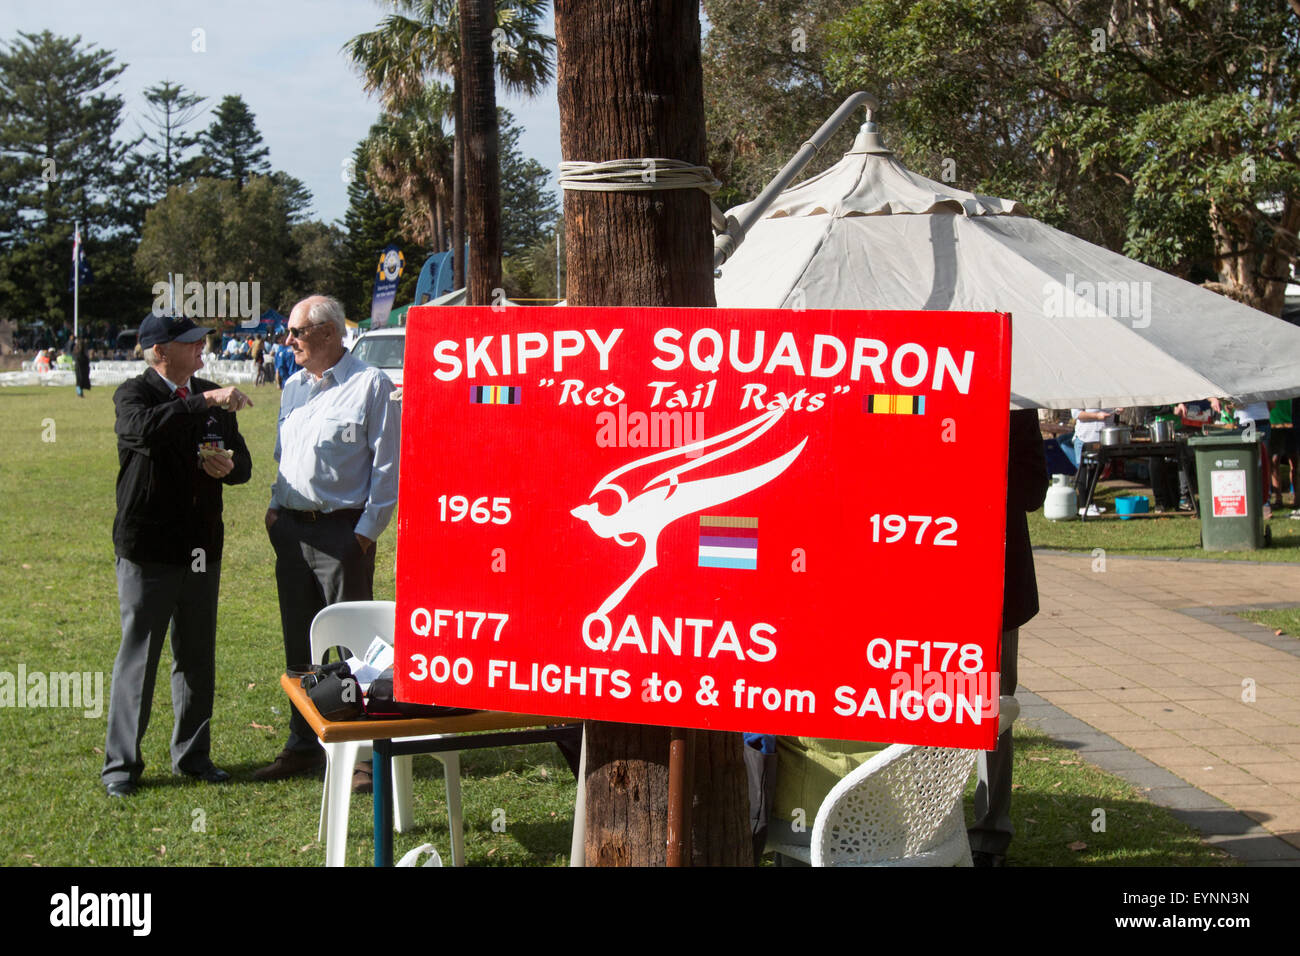 skippy squadron members from the vietnam war at a Sydney military tattoo event,new south wales,australia Stock Photo